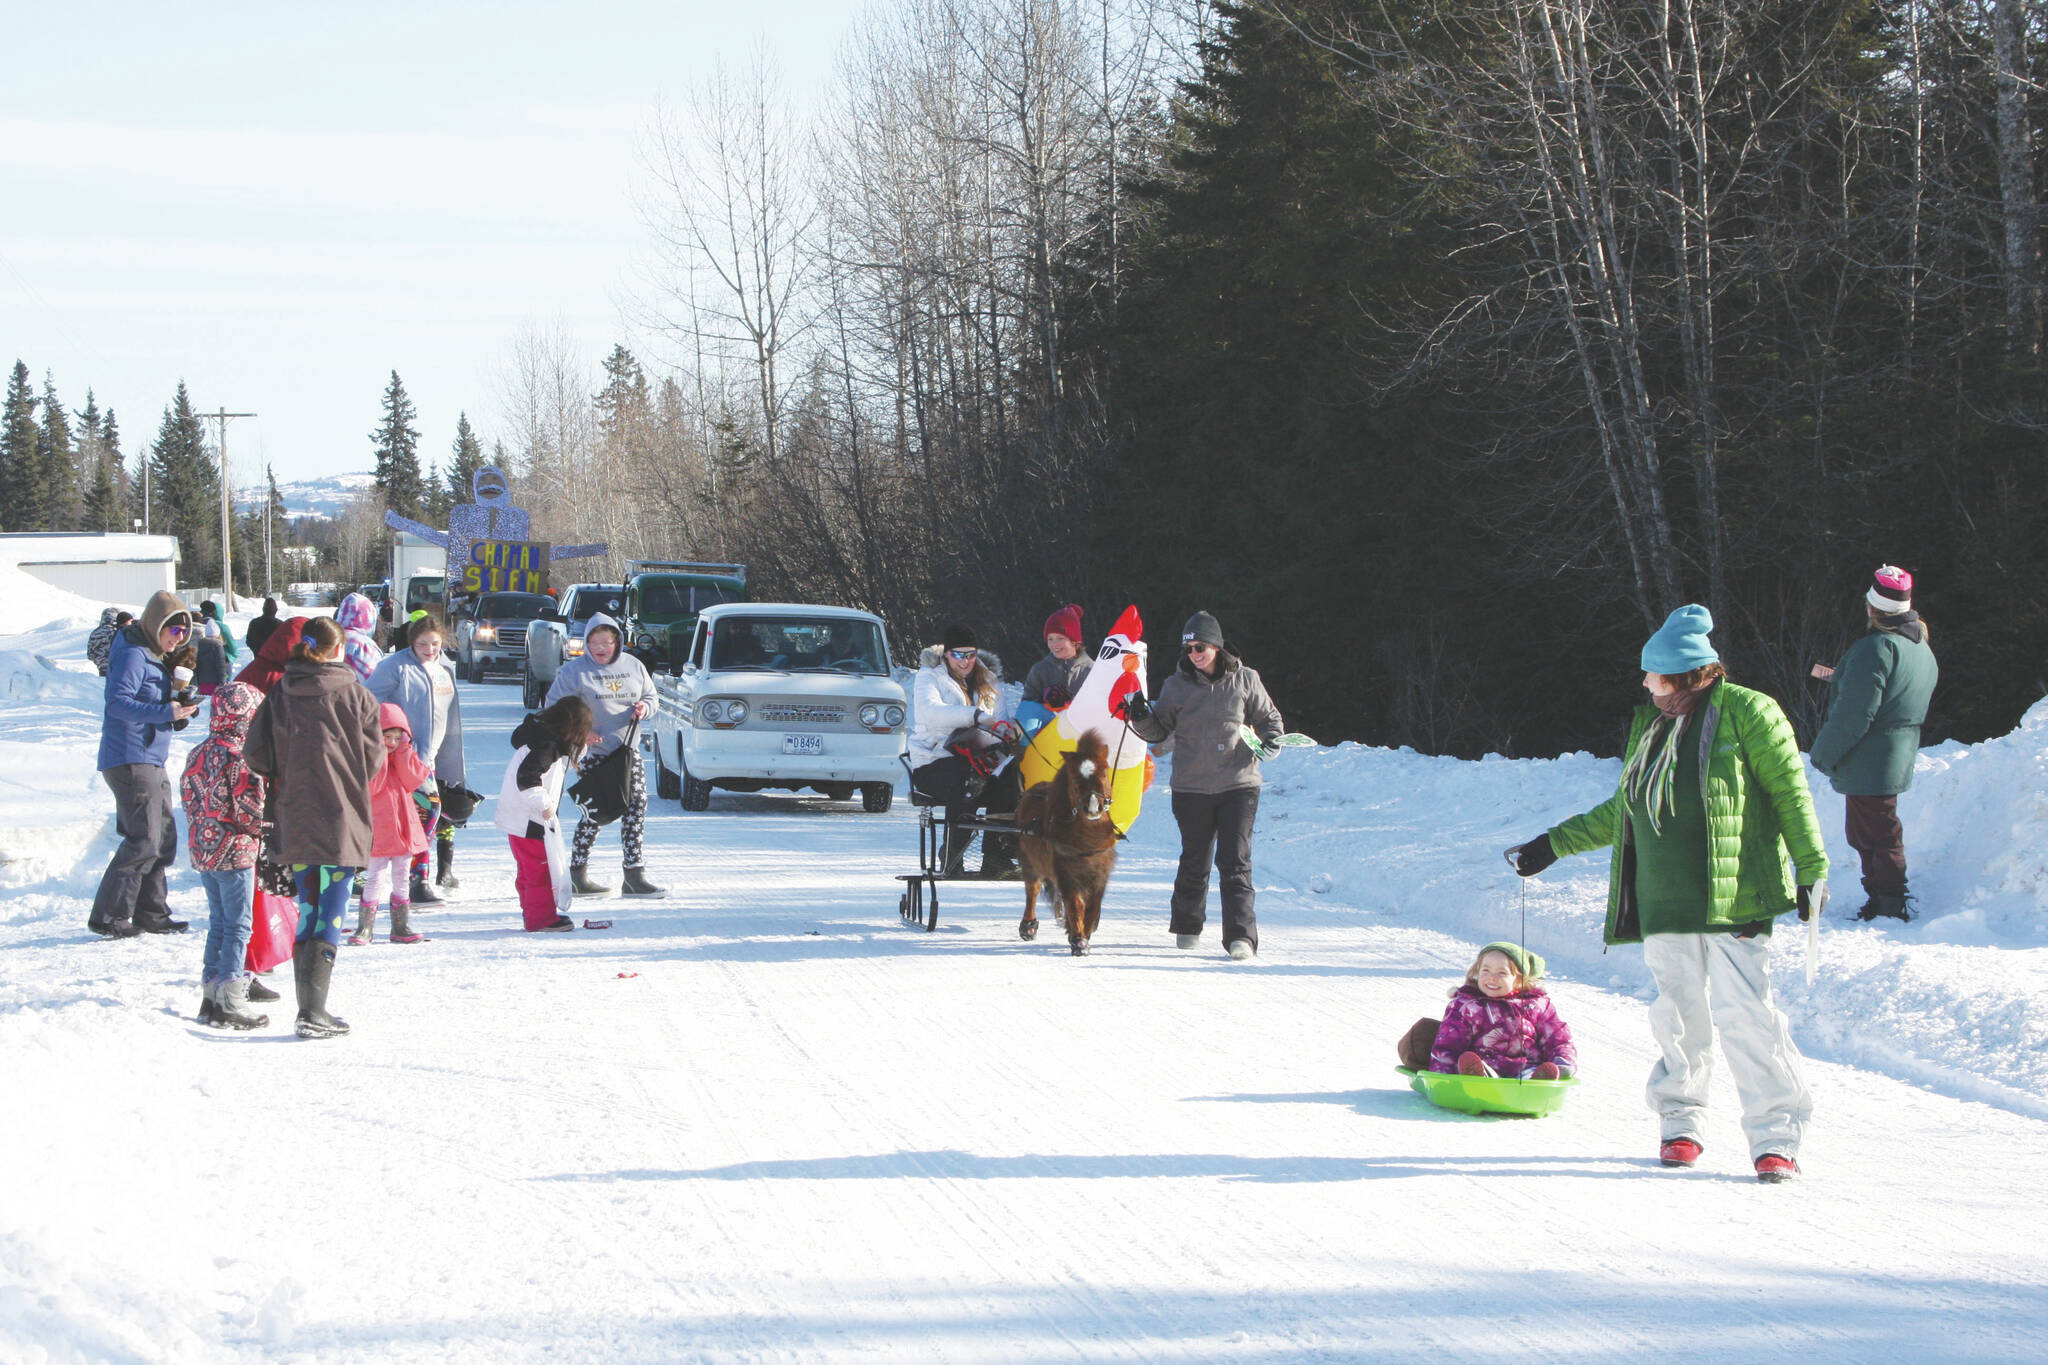 The Anchor Point Snow Rondi Parade proceeds down School Street on Saturday in Anchor Point. (Photo by Delcenia Cosman/Homer News)